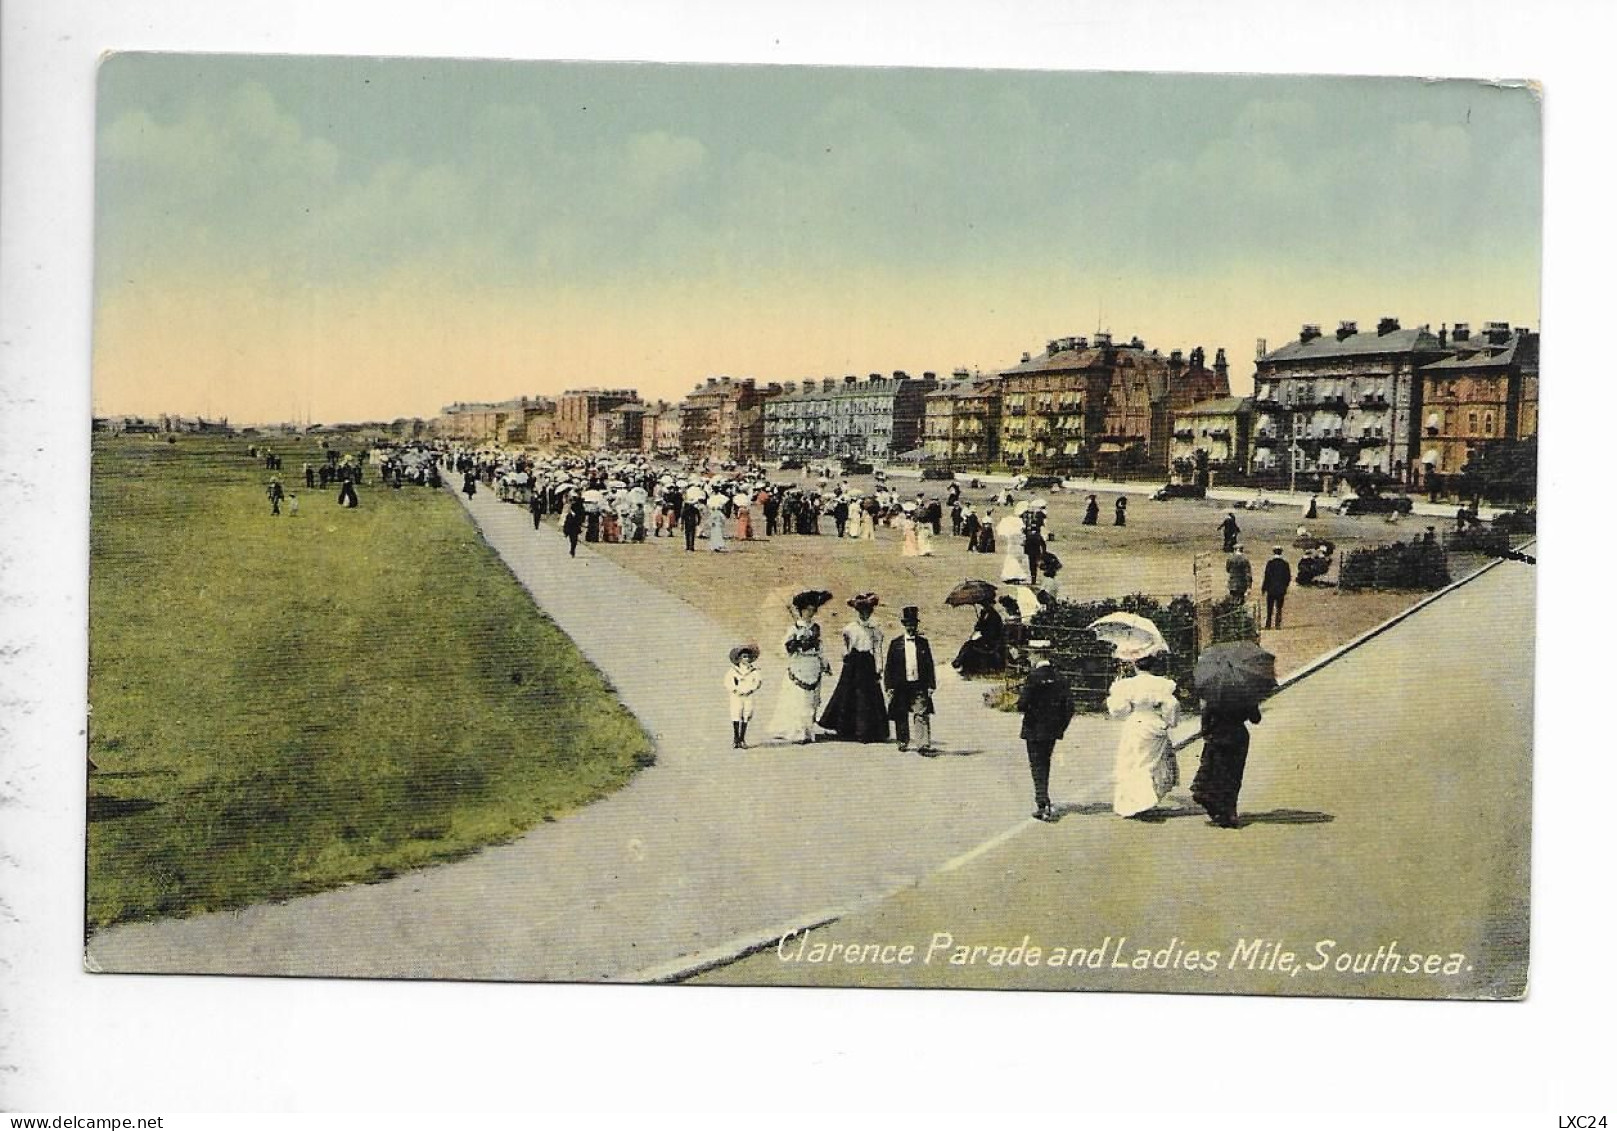 SOUTHSEA. CLARENCE PARADE AND LADIES MILE. - Southsea